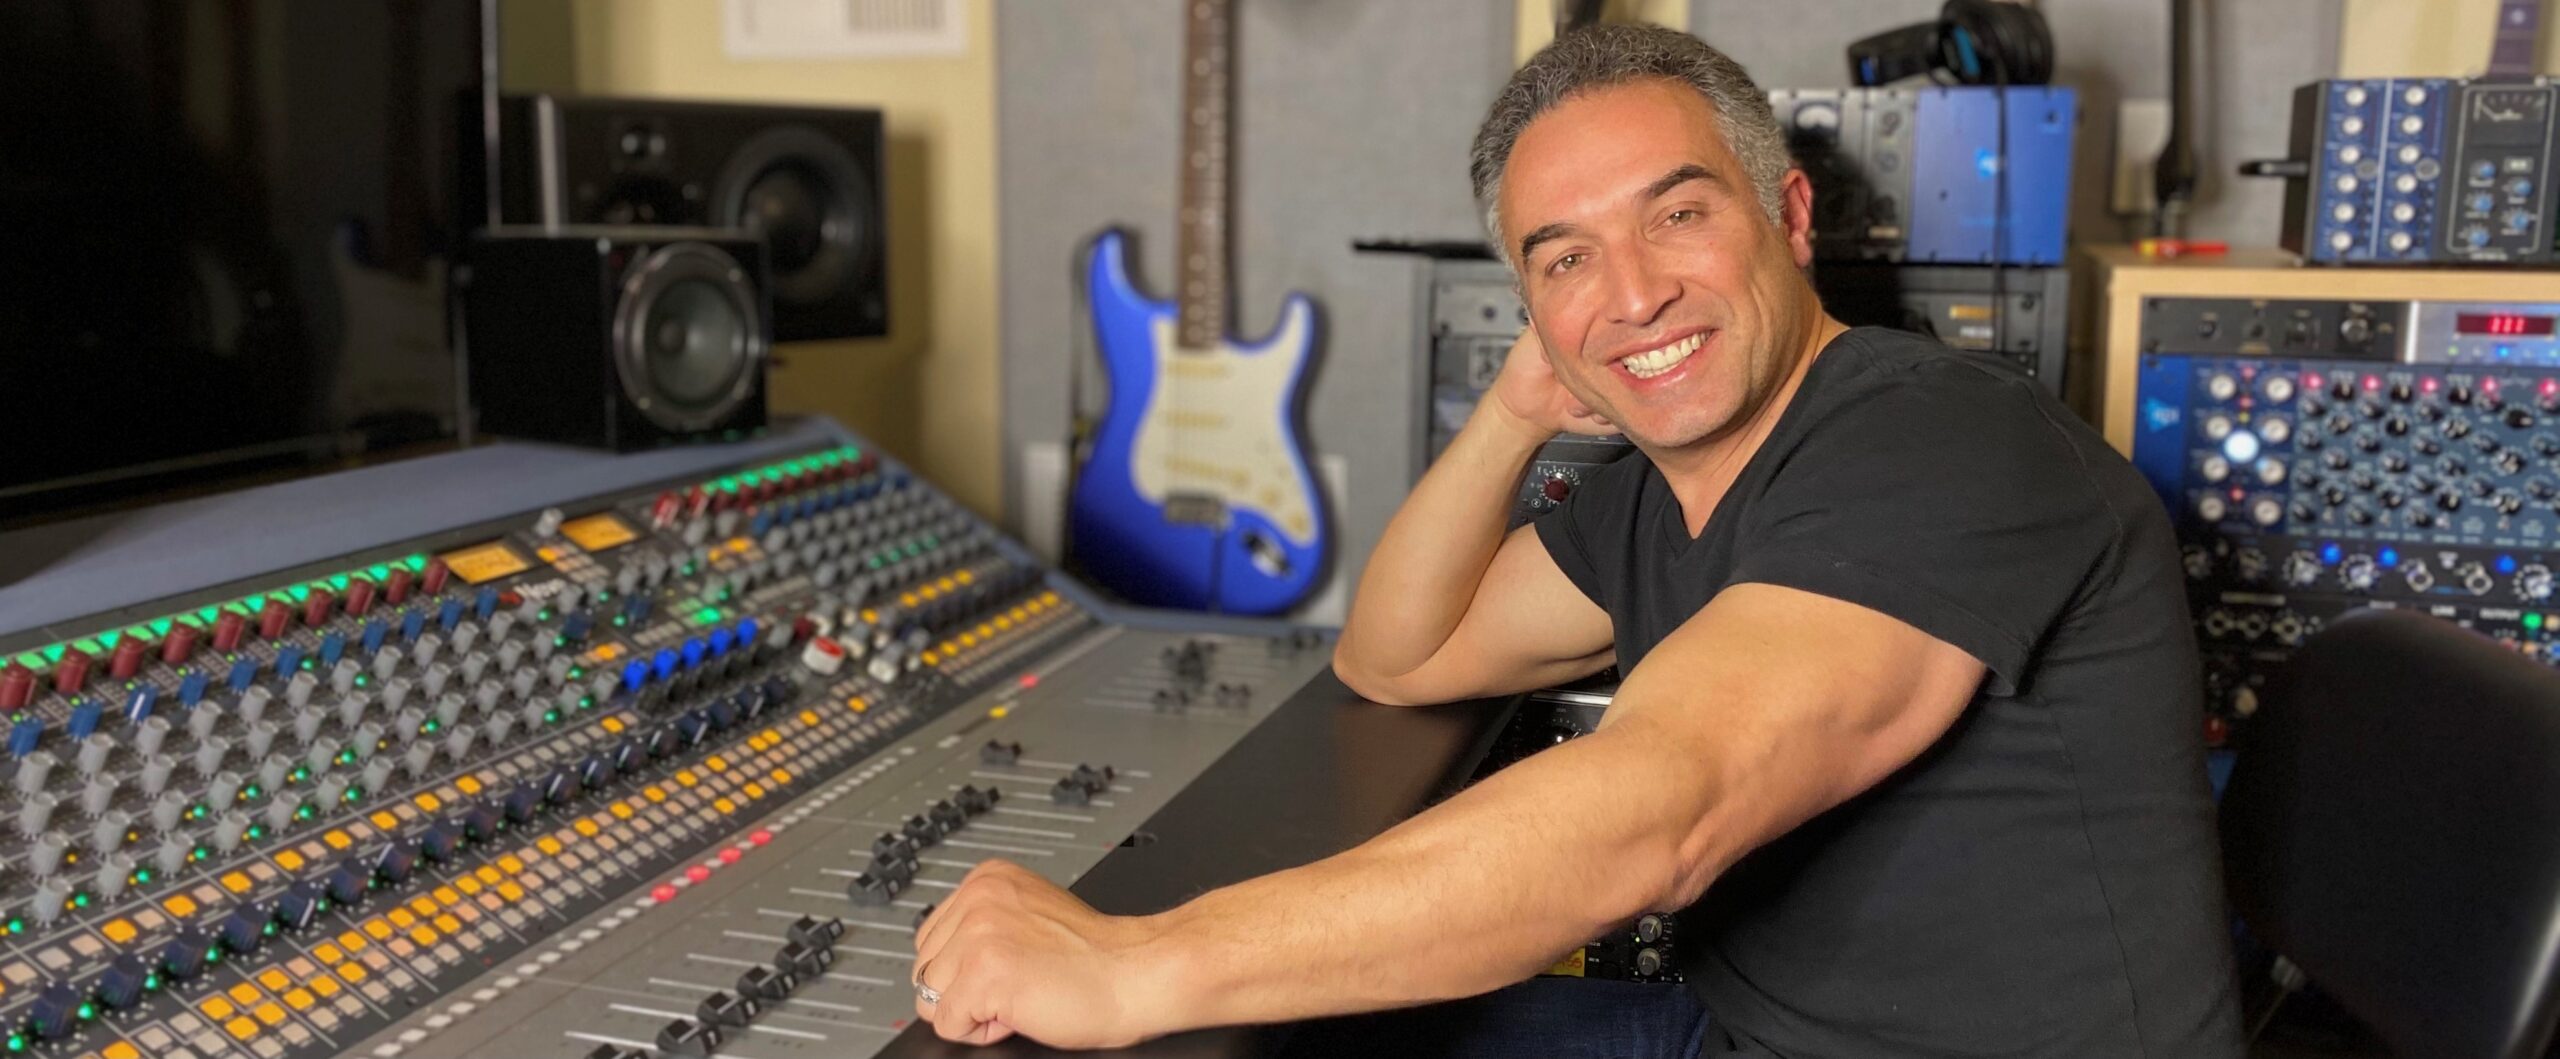 The Award-Winning Neve 8424 Console brings added Flexibility to Mike Smith’s Workflow